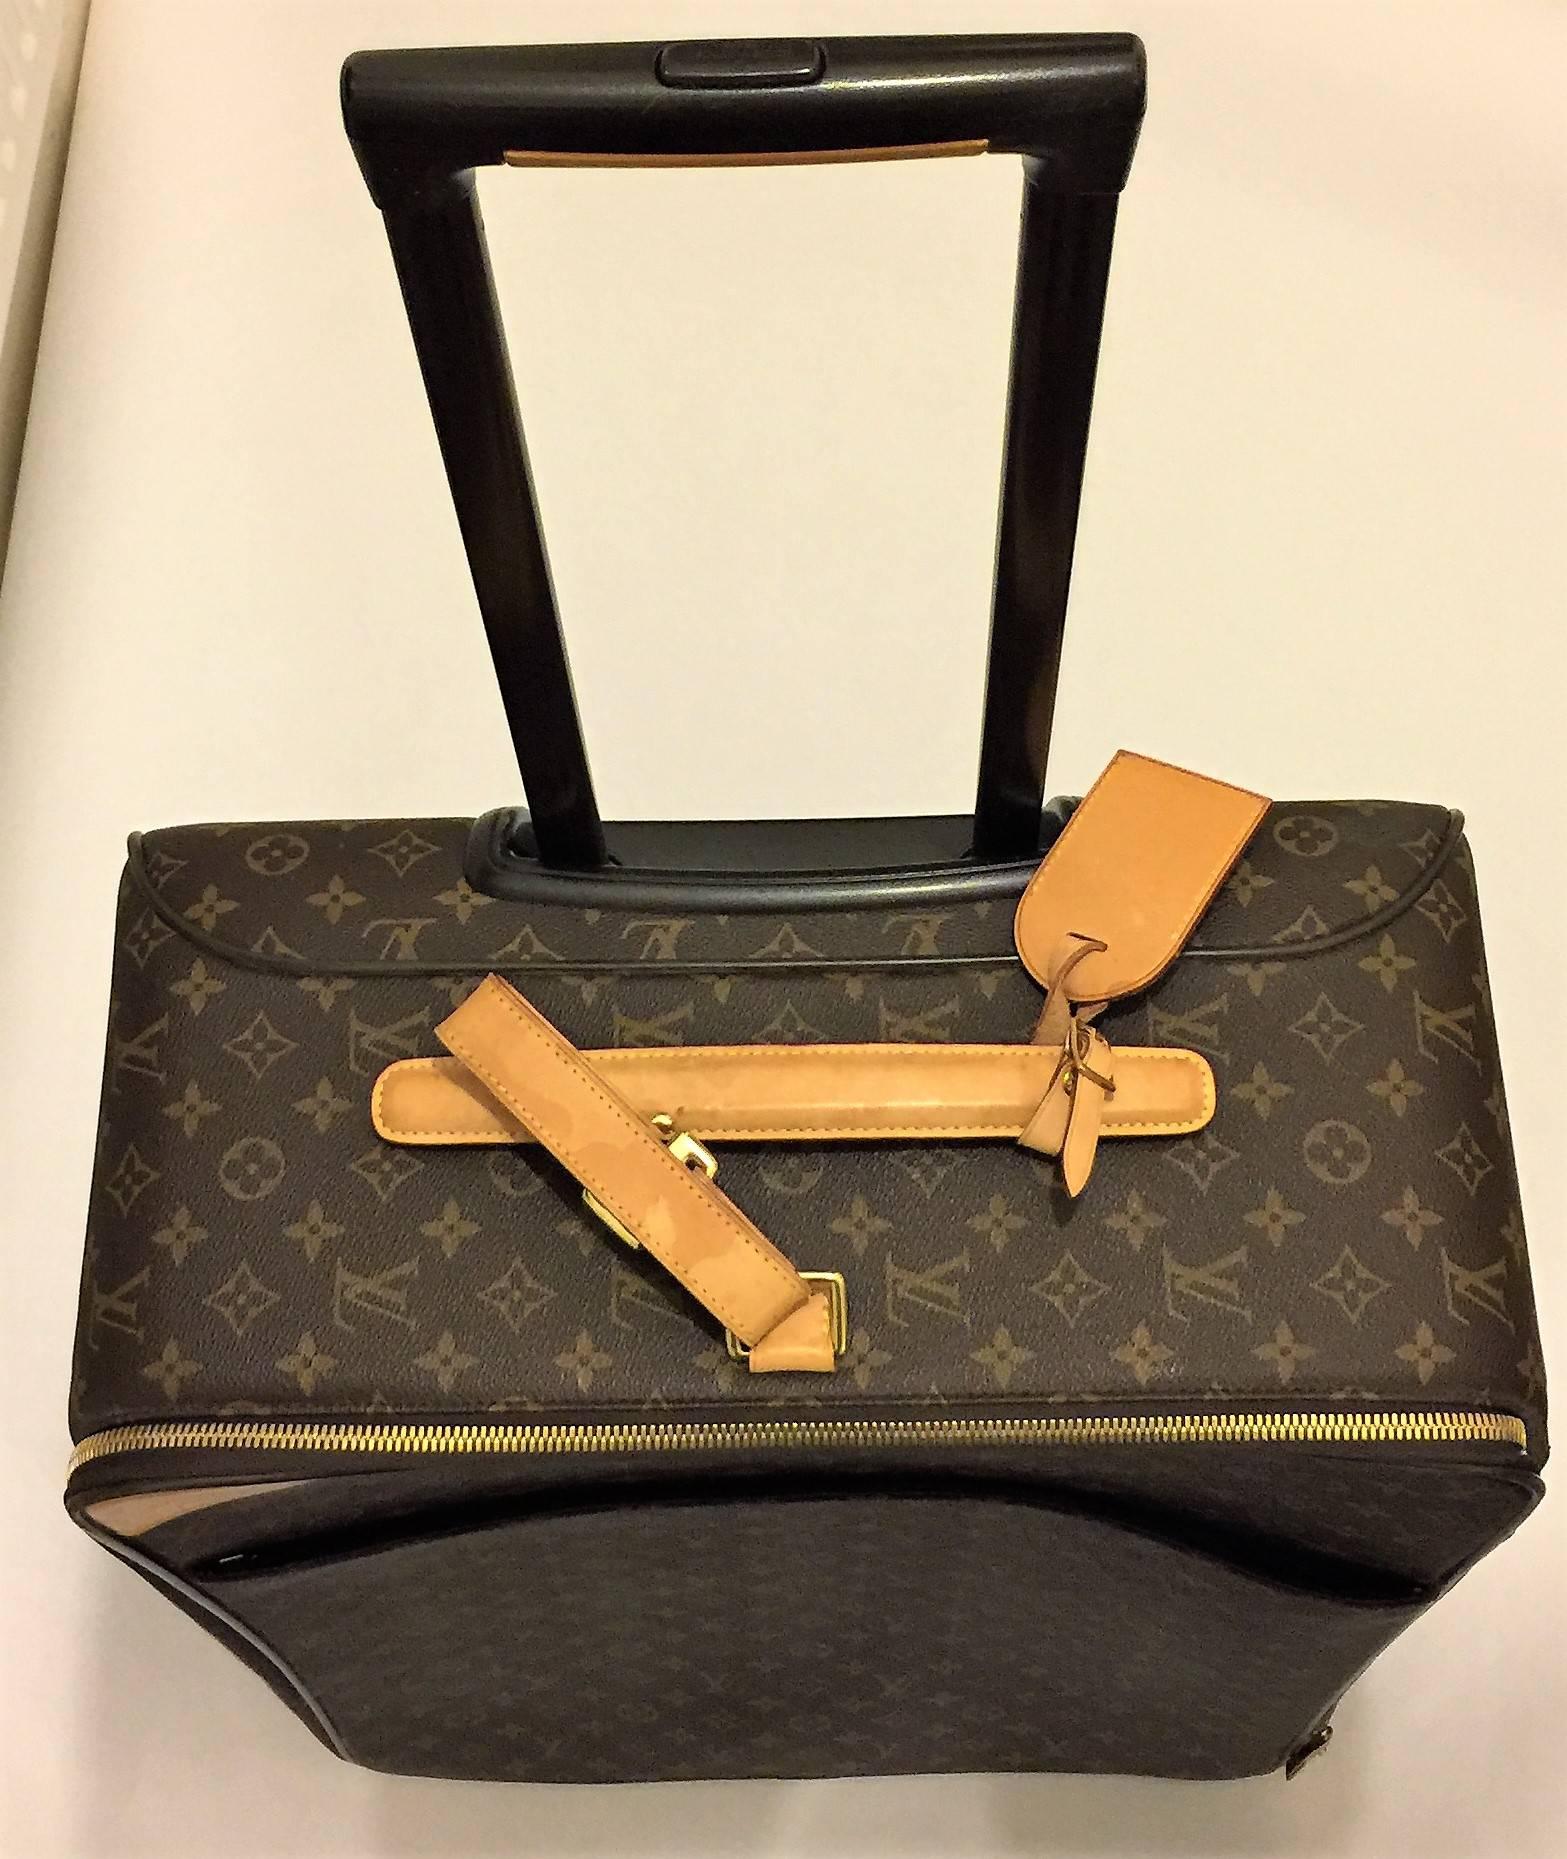 LOUIS VUITTON PEGASE 65 MONOGRAM ROLLING SUITCASE.
Crafted by Louis Vuitton in classic Monogram canvas, Pegase 65 is the largest of the cabin size rolling suitcases. It features particularly stable and noiseless wheels.  Measurements 47cm by 67cm